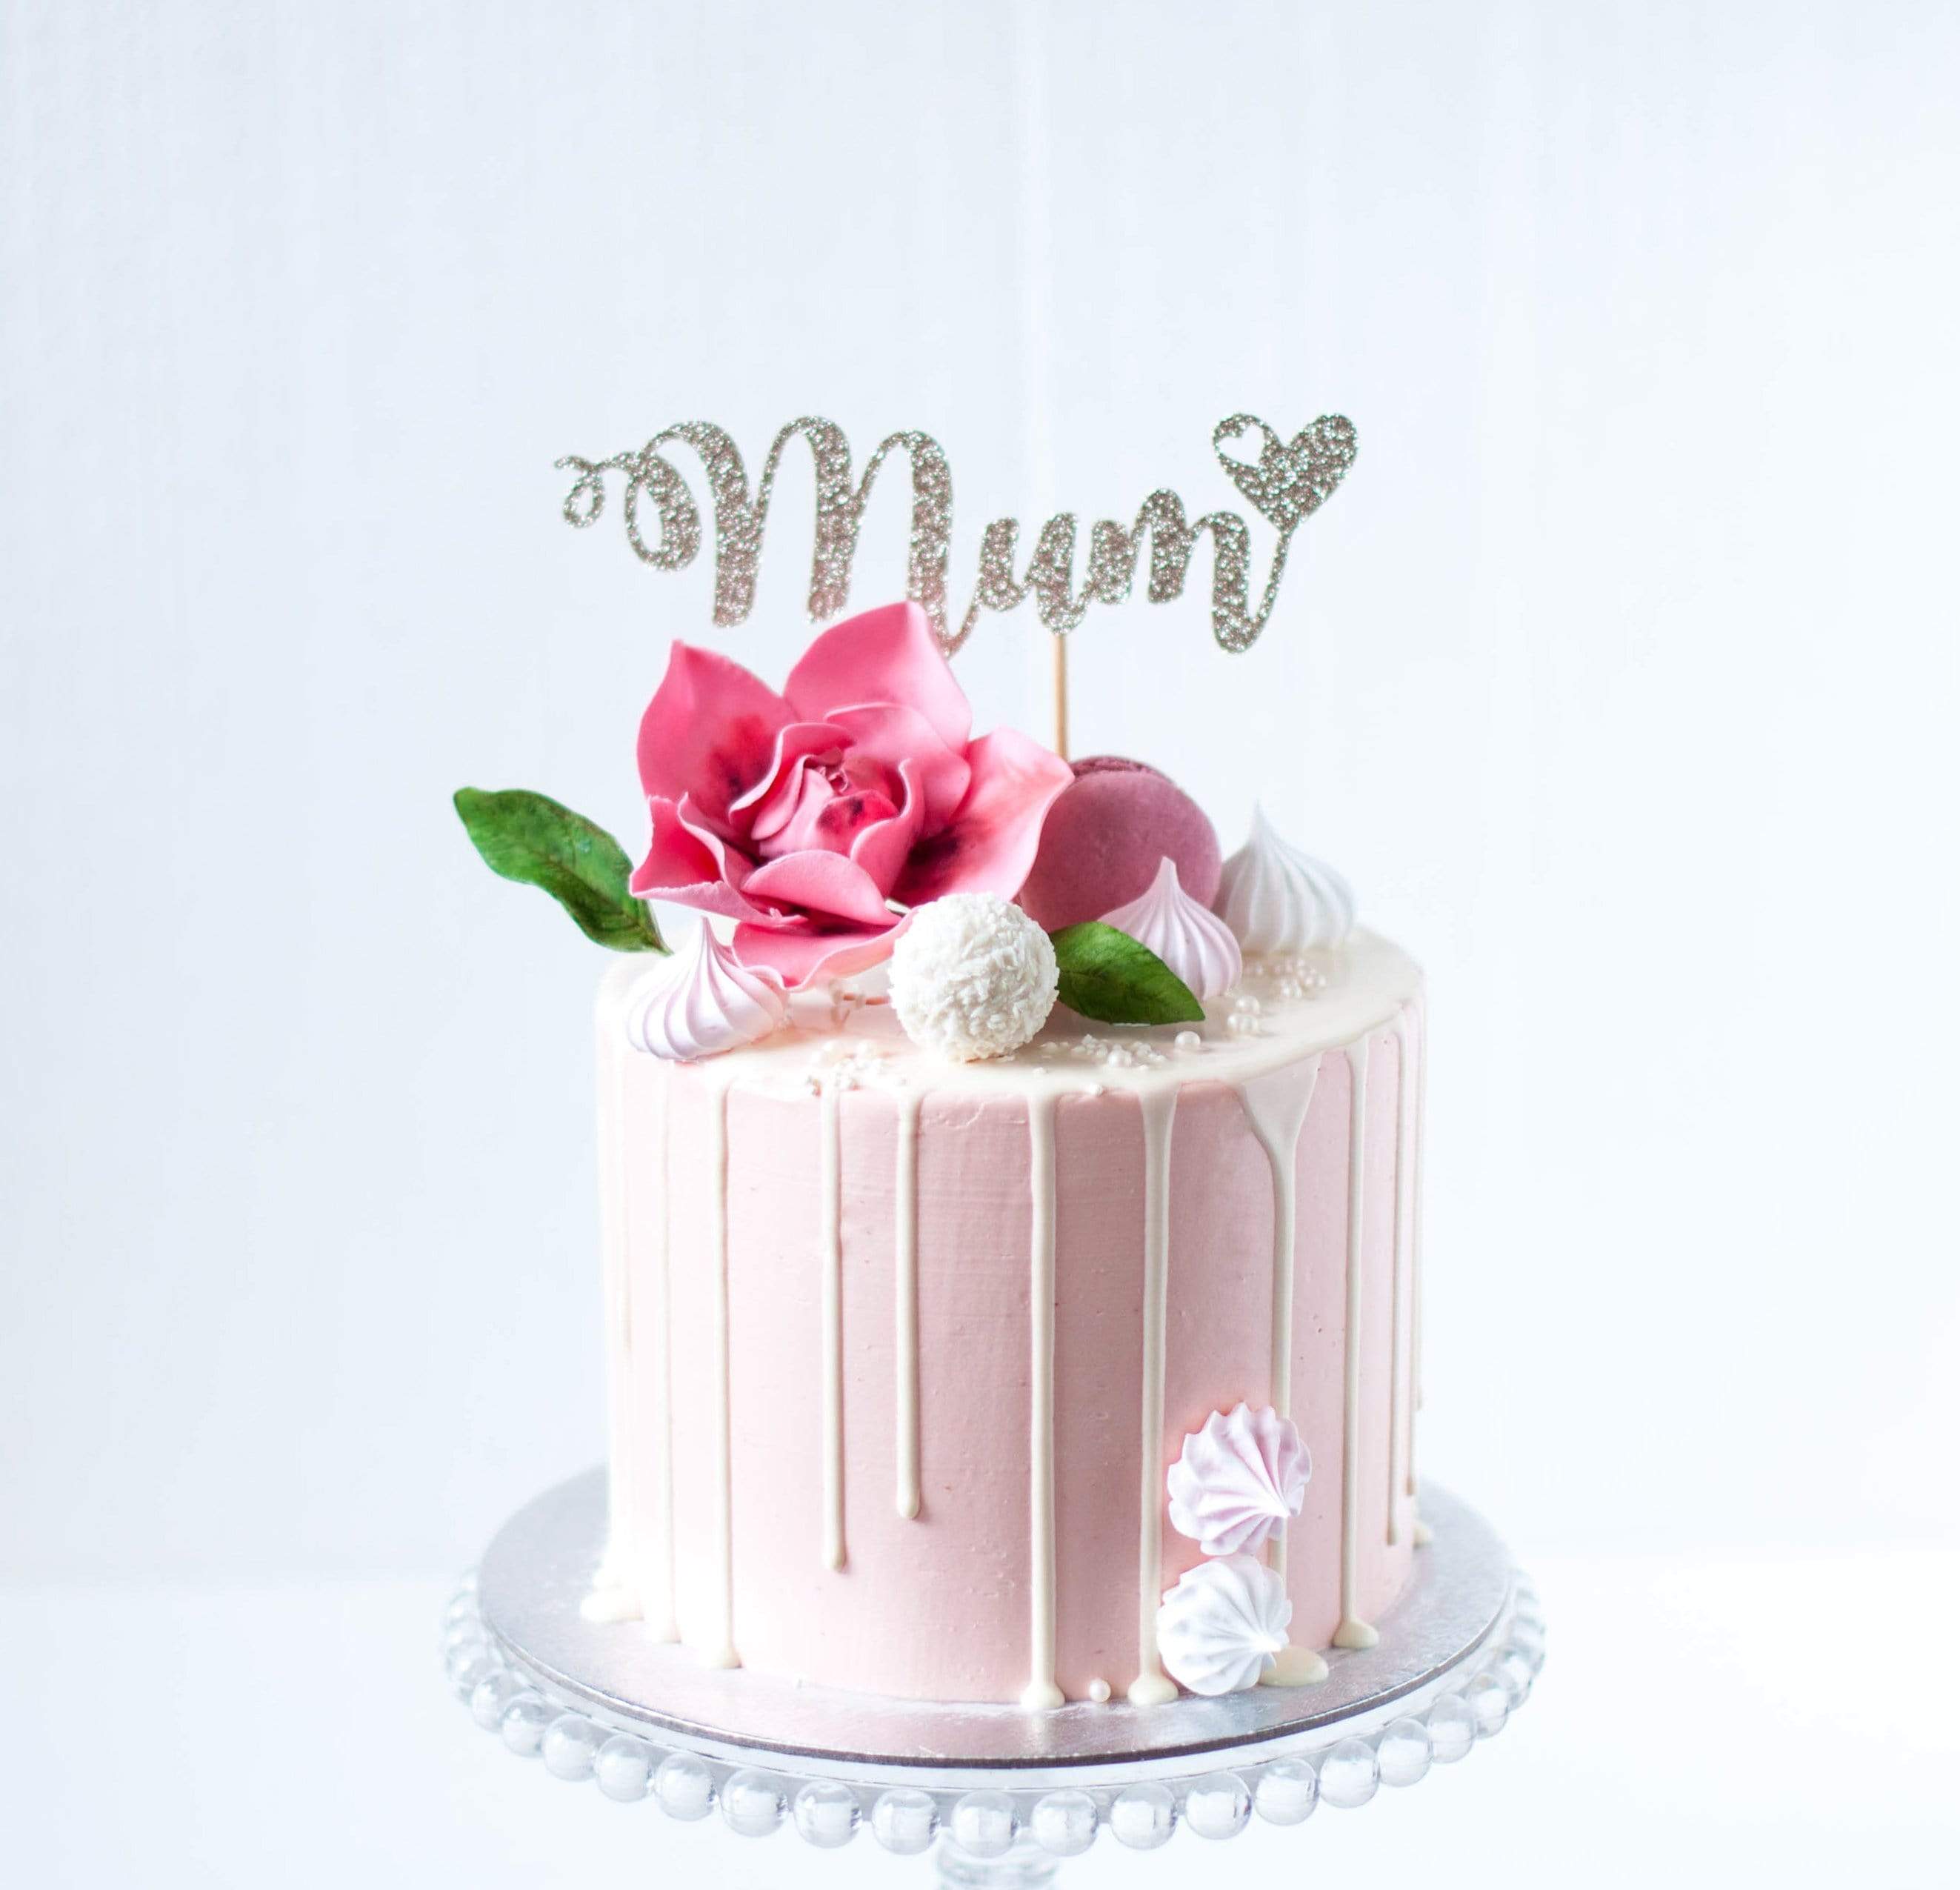 Mom's Bakery in Thatipur,Gwalior - Best Bakeries in Gwalior - Justdial